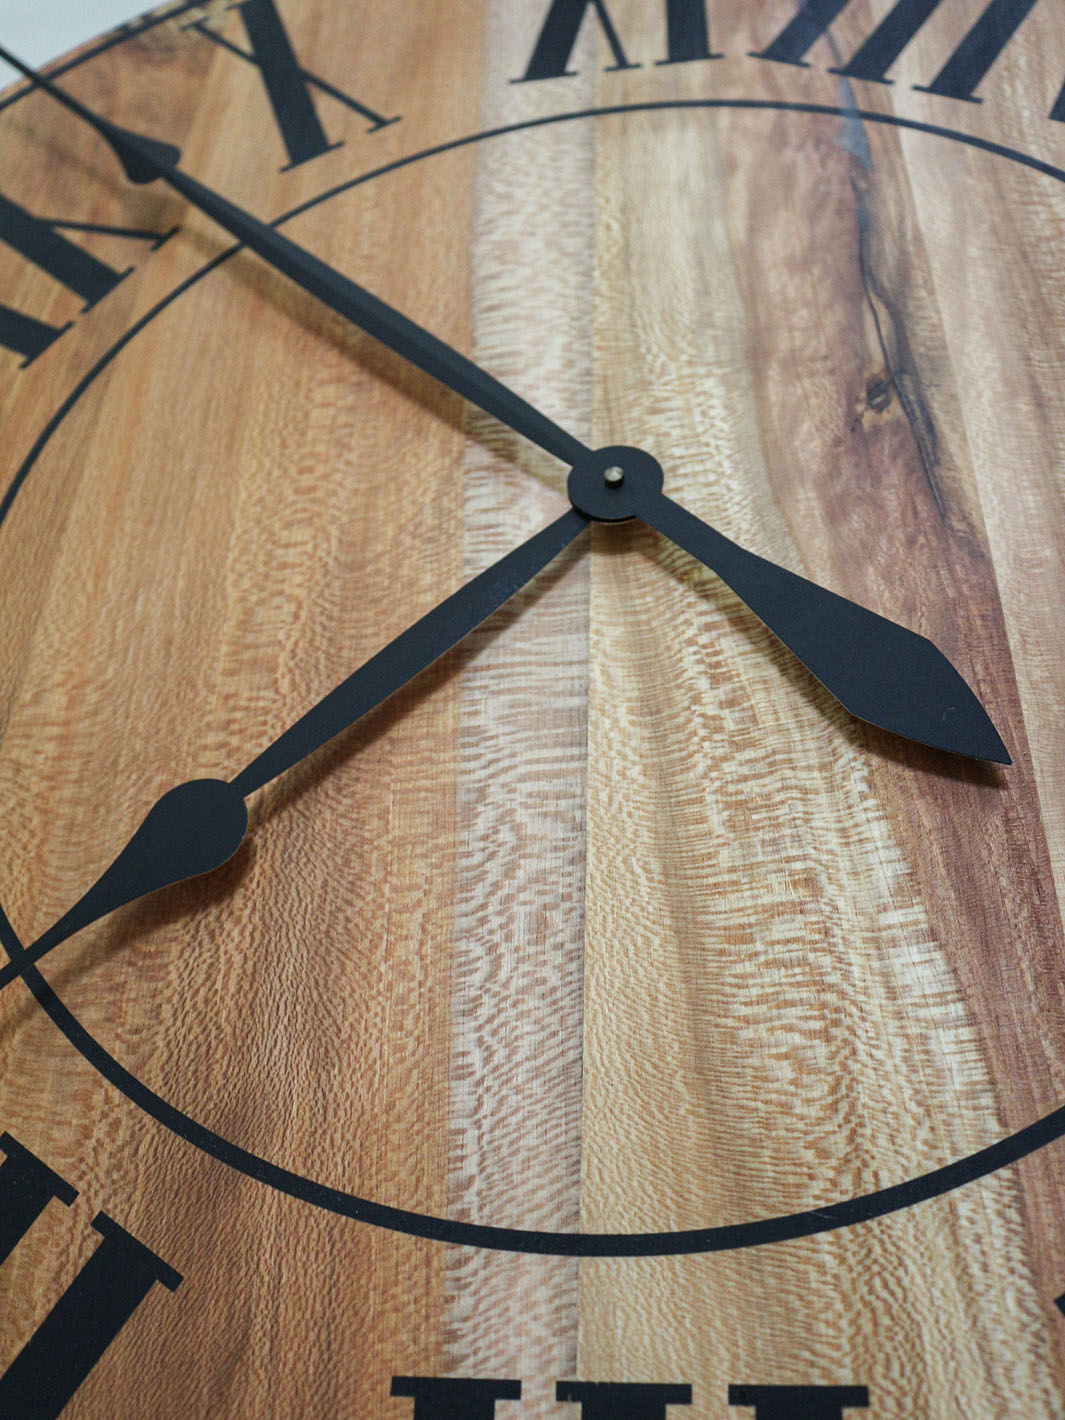 Large Quartersawn Sycamore Hardwood Wall Clock with Black Roman Numerals Earthly Comfort Clocks 610-5